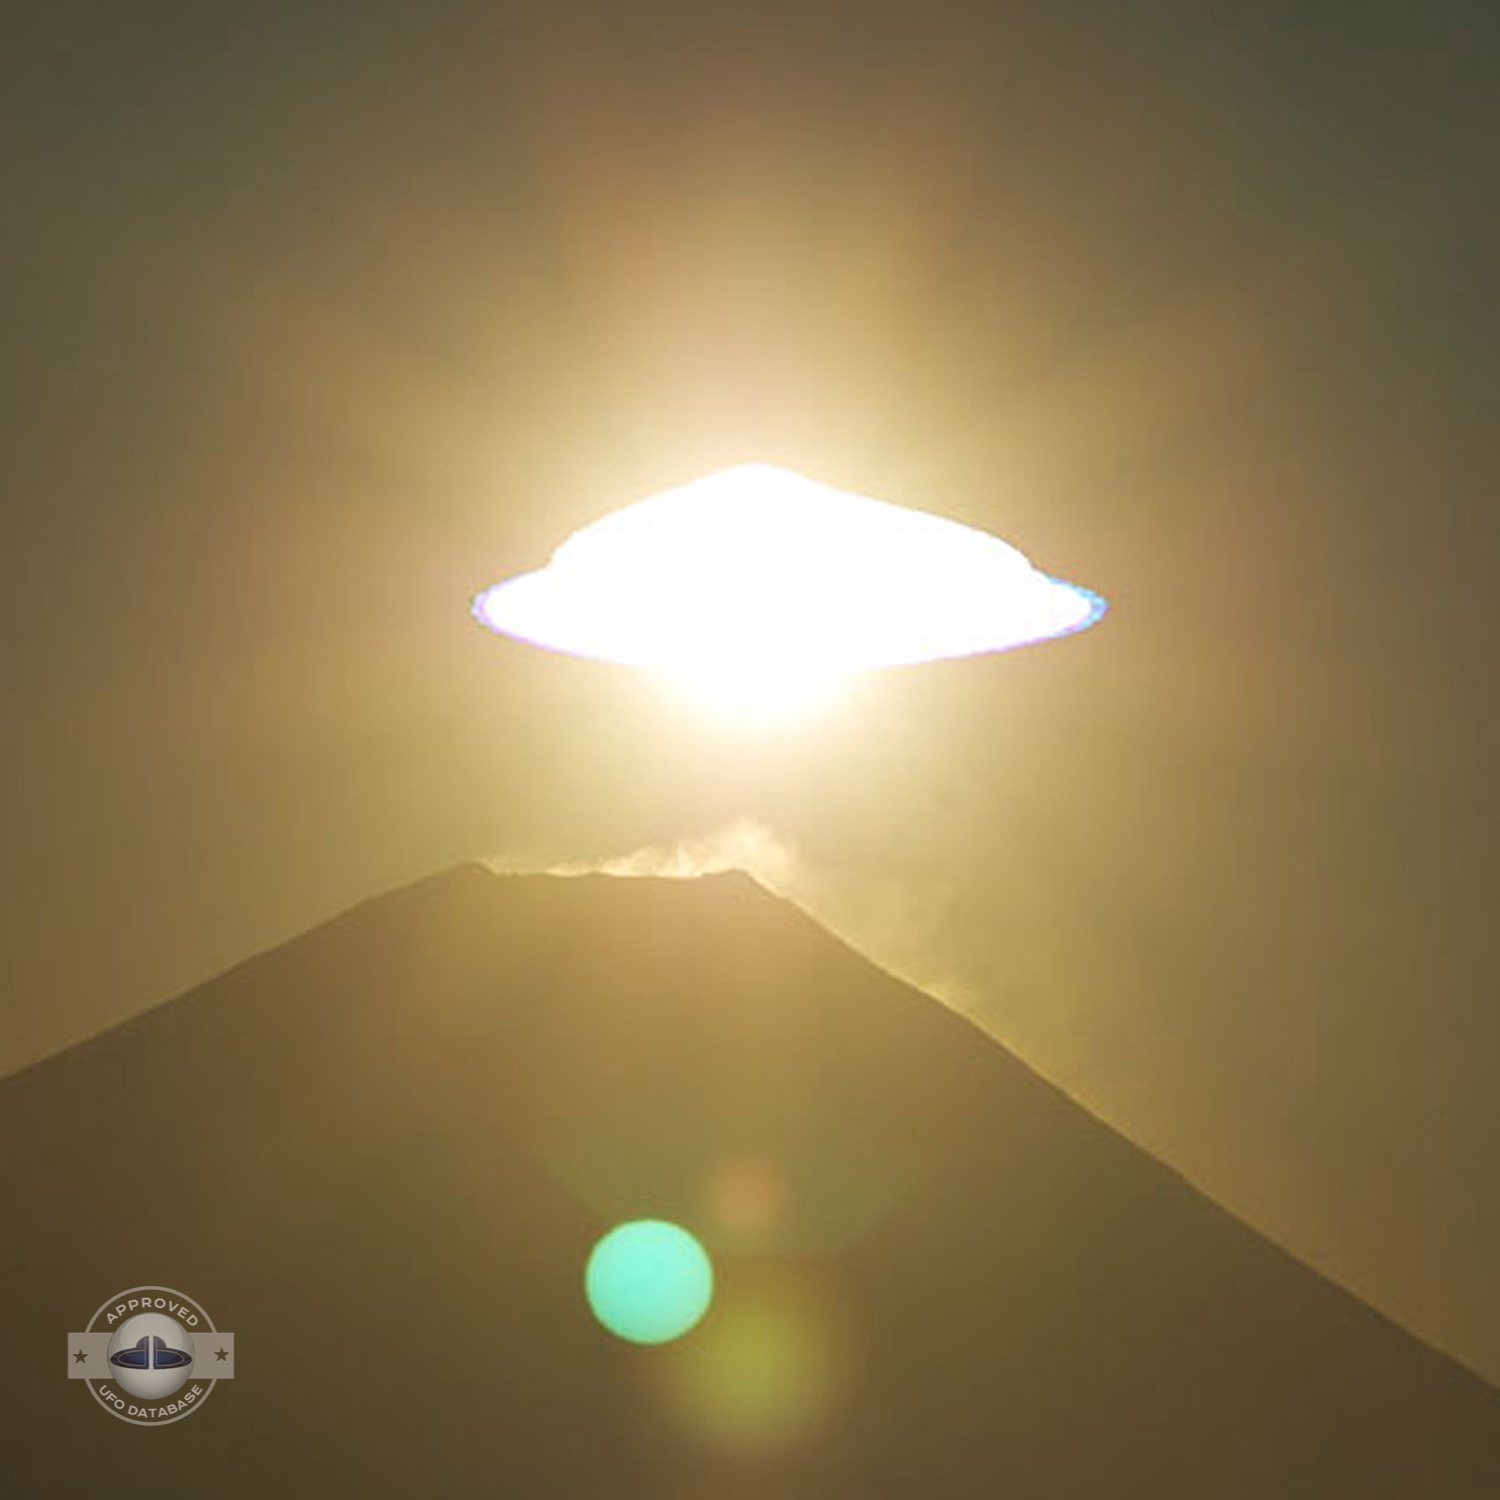 Gigantic bright glowing UFO mother ship over Mount Fuji | Japan | 2006 UFO Picture #227-2